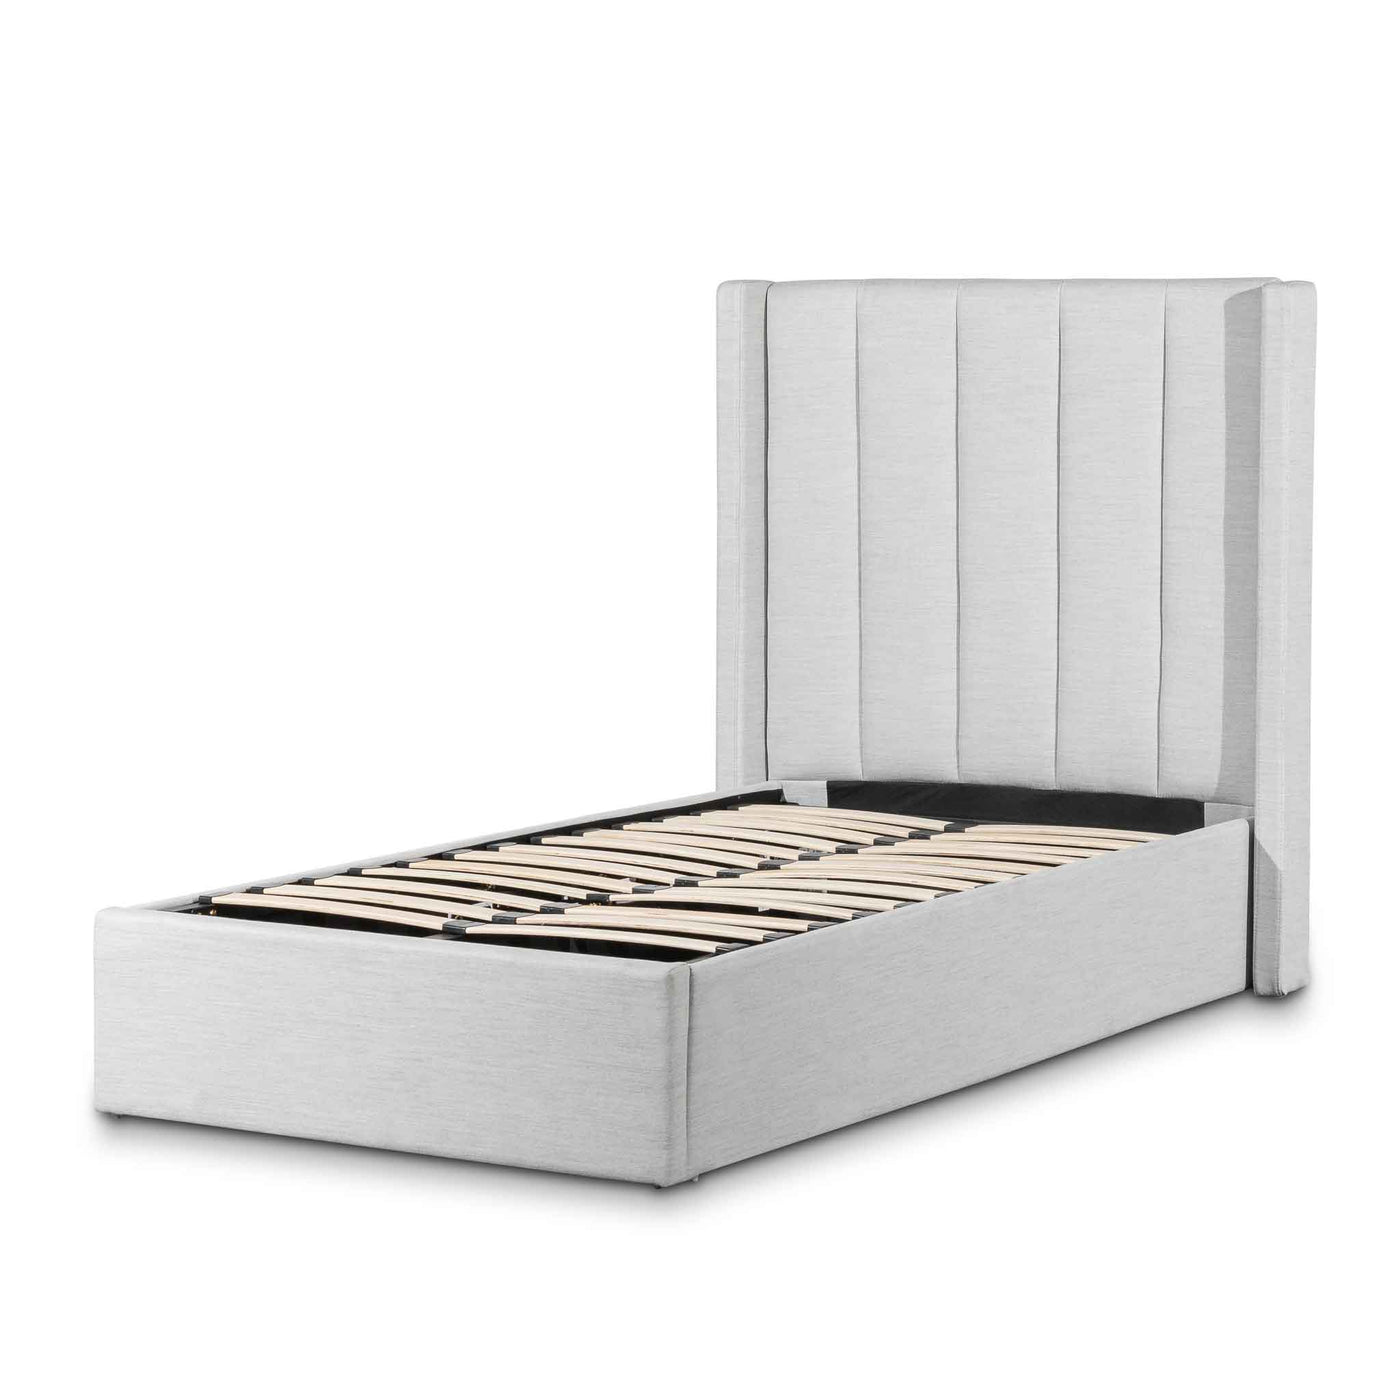 Fabric Single Bed Frame - Pearl Grey with Storage